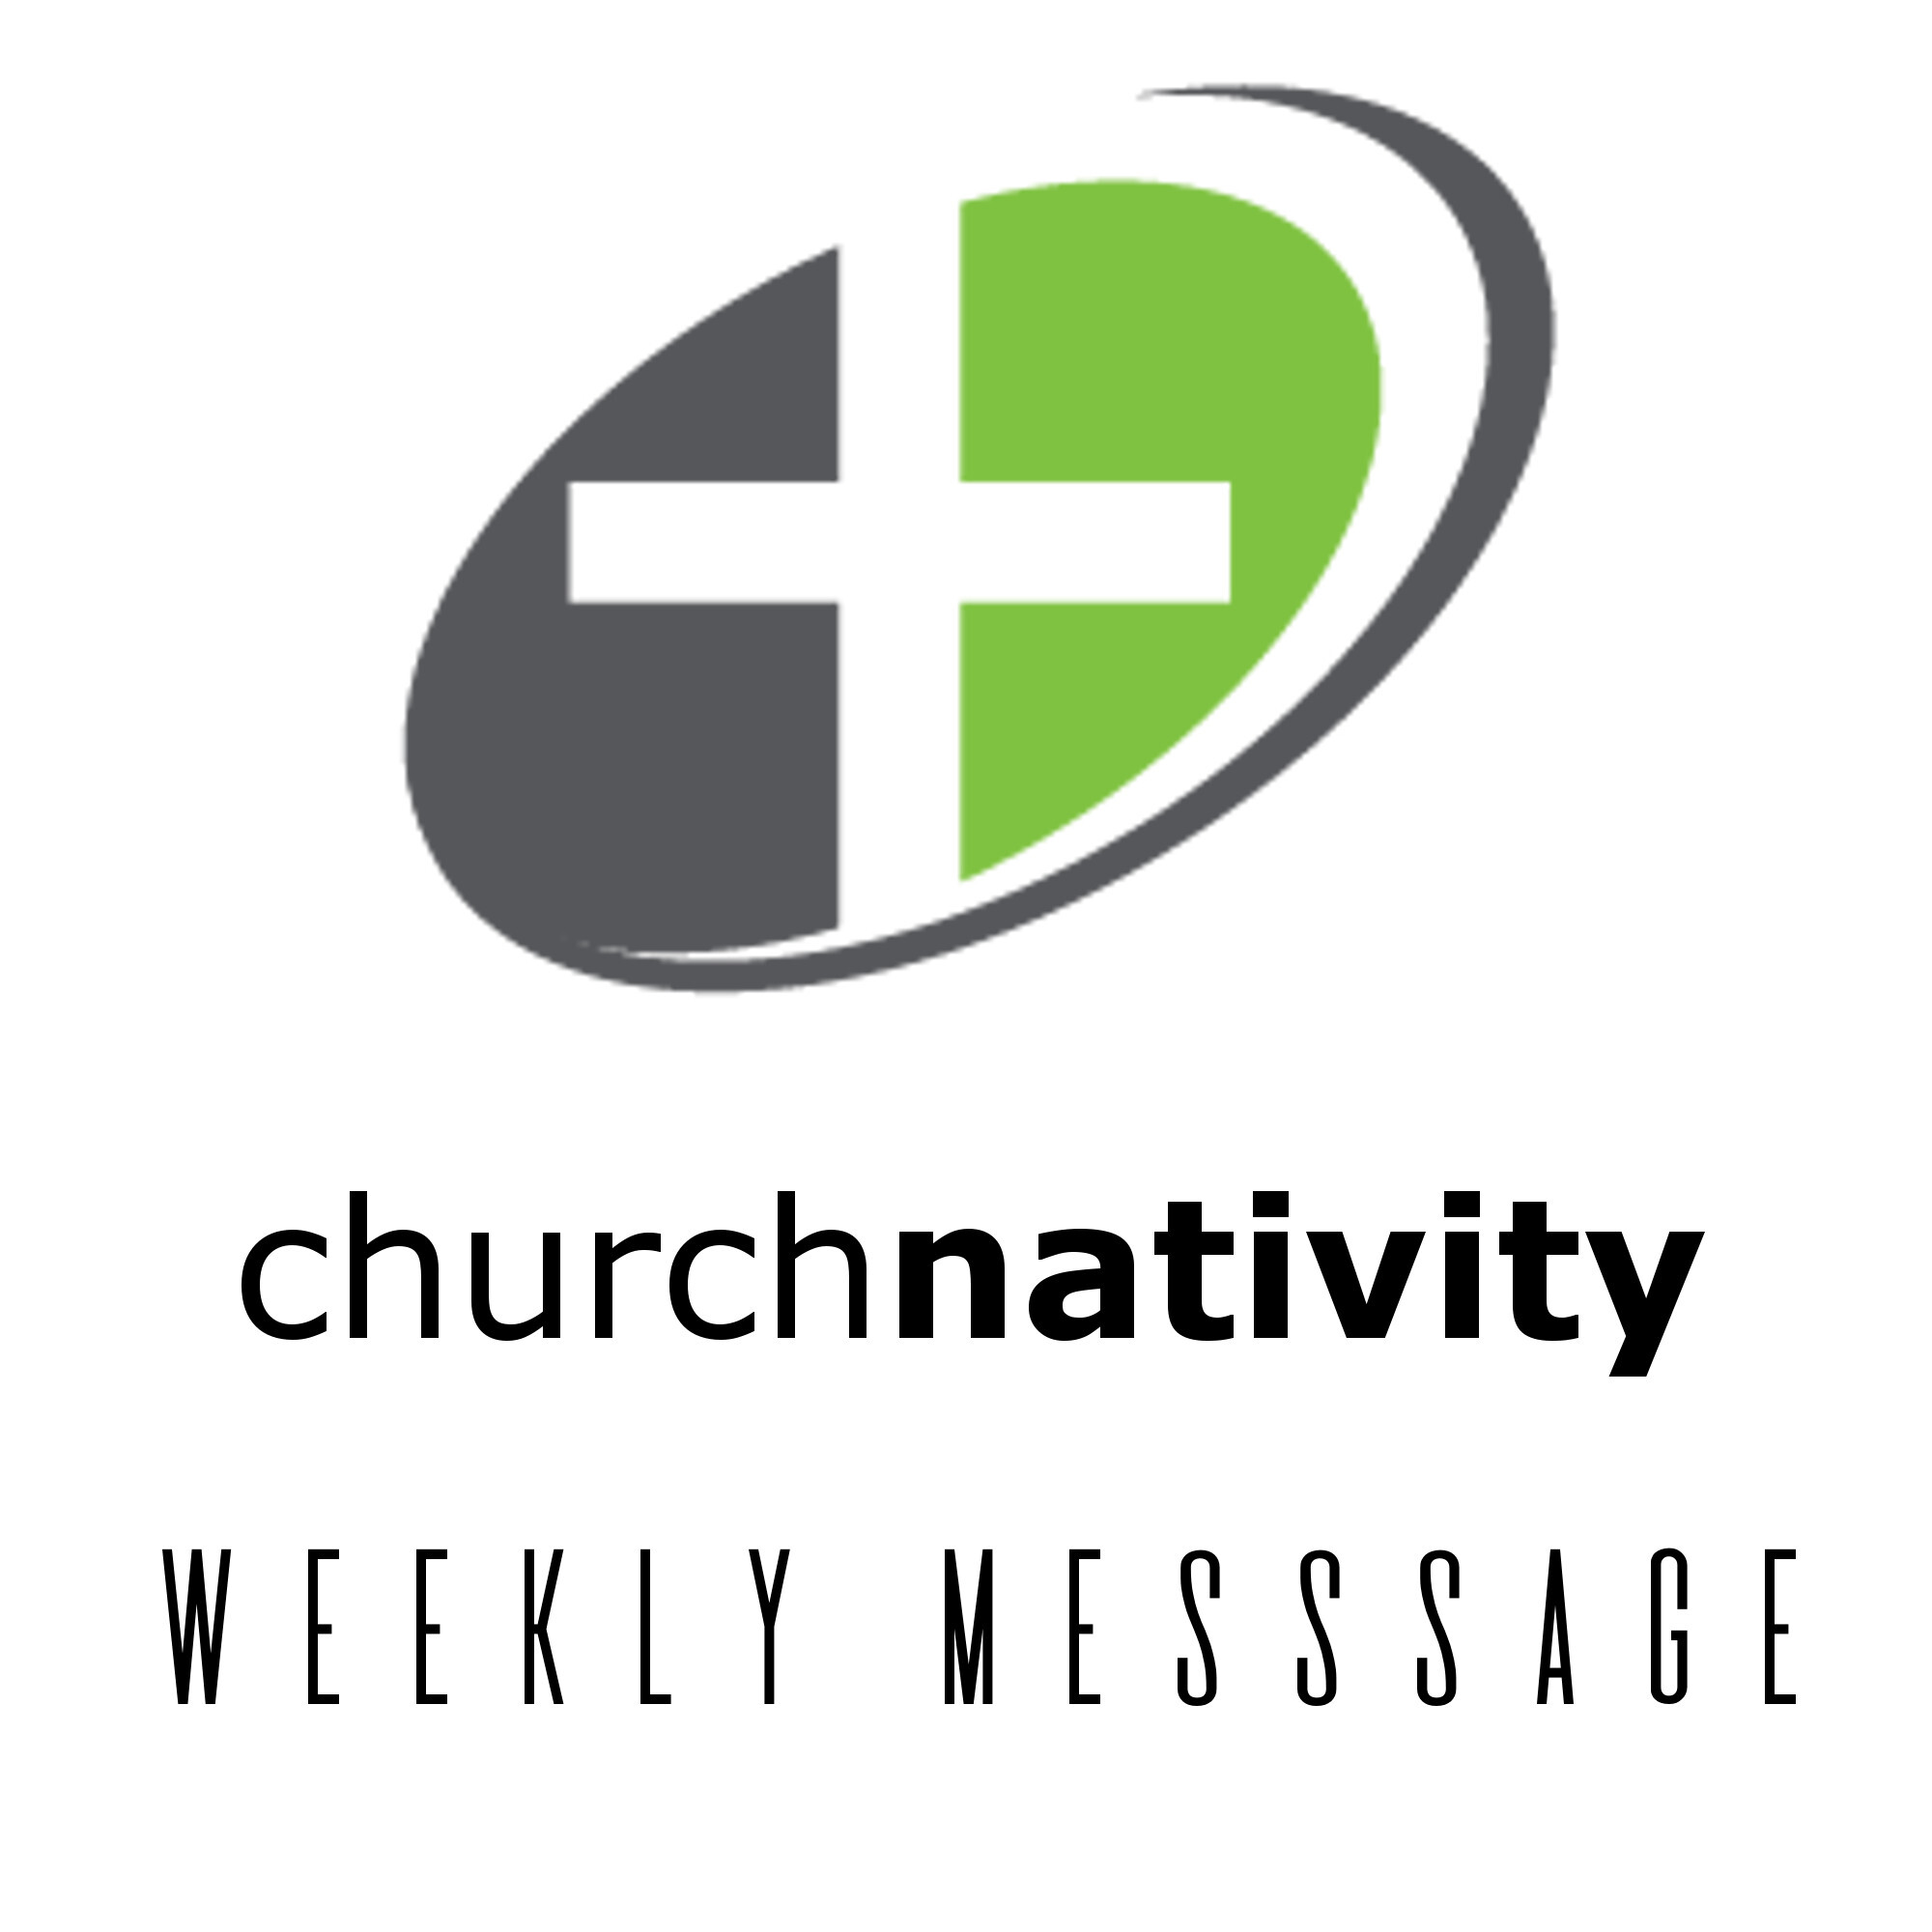 Church Nativity Weekly Message - Bad Guys of the Bible Week 4